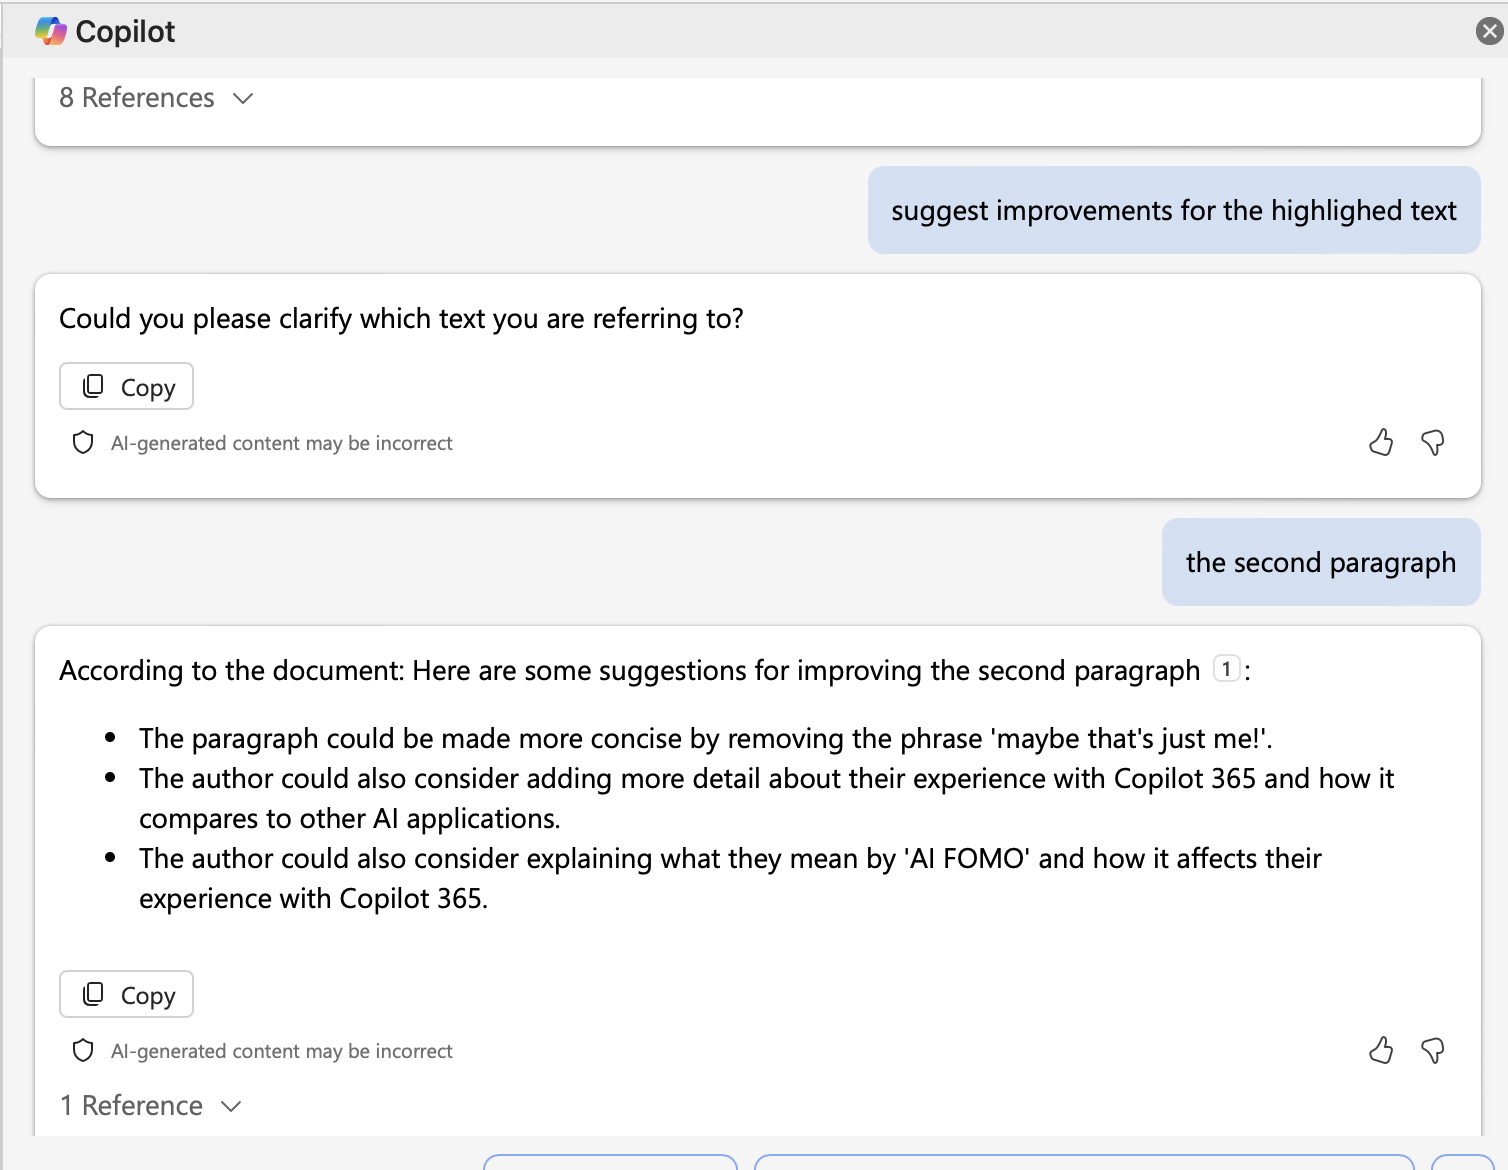  This image shows a screenshot of a user interacting with the Copilot text editor, focusing on improving a document. The interface displays a popup with a request for clarification, asking which text the user is referring to for suggested improvements. Below this, the document provides feedback for enhancing the second paragraph, including making it more concise, adding detail about the user's experience with Copilot 365, and explaining the term 'AI FOMO.' The interface suggests that the AI-generated content may be incorrect and provides an option to copy the text